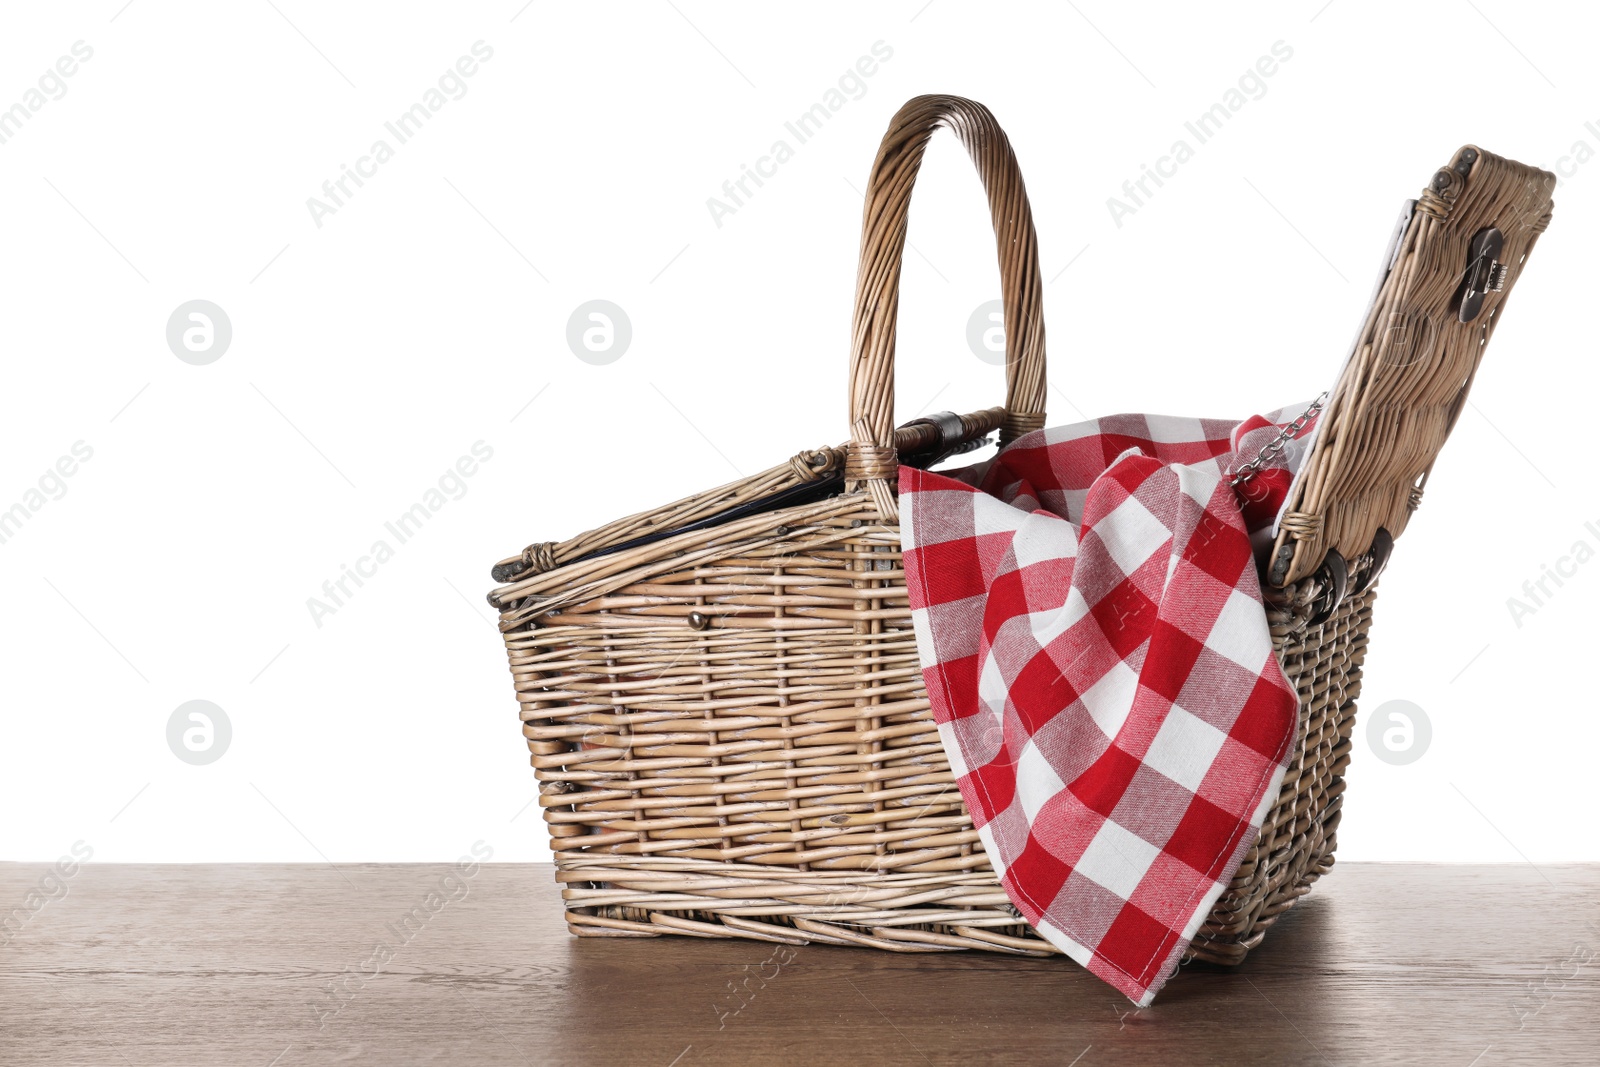 Photo of Wicker picnic basket and checkered blanket on wooden table against white background